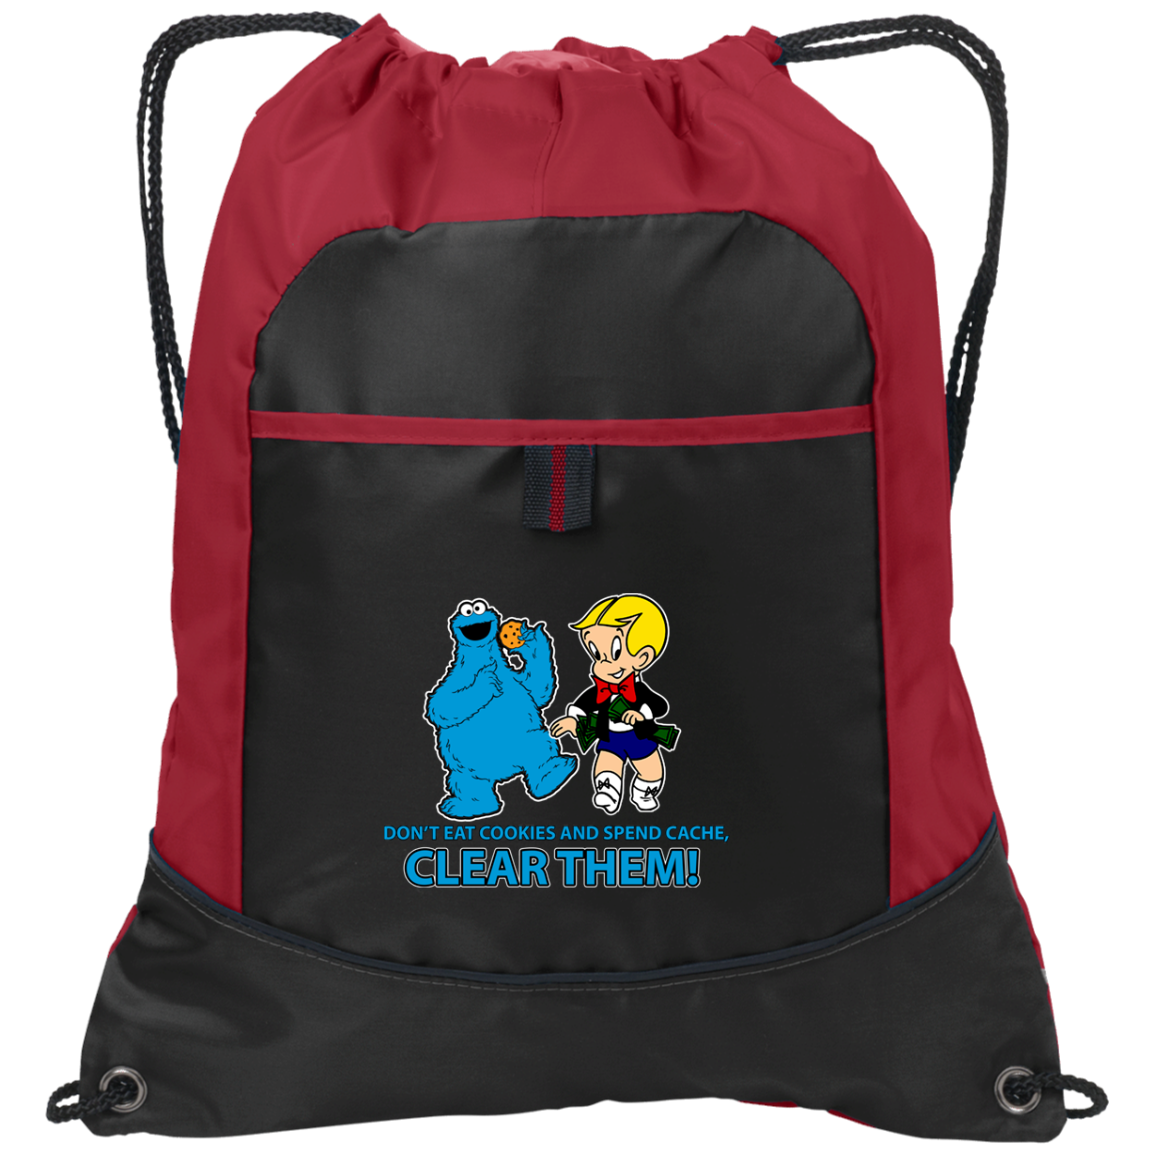 ArtichokeUSA Custom Design. Don't Eat Cookies And Spend Cache! Delete Them! Cookie Monster and Richie Rich Fan Art/Parody. Pocket Cinch Pack